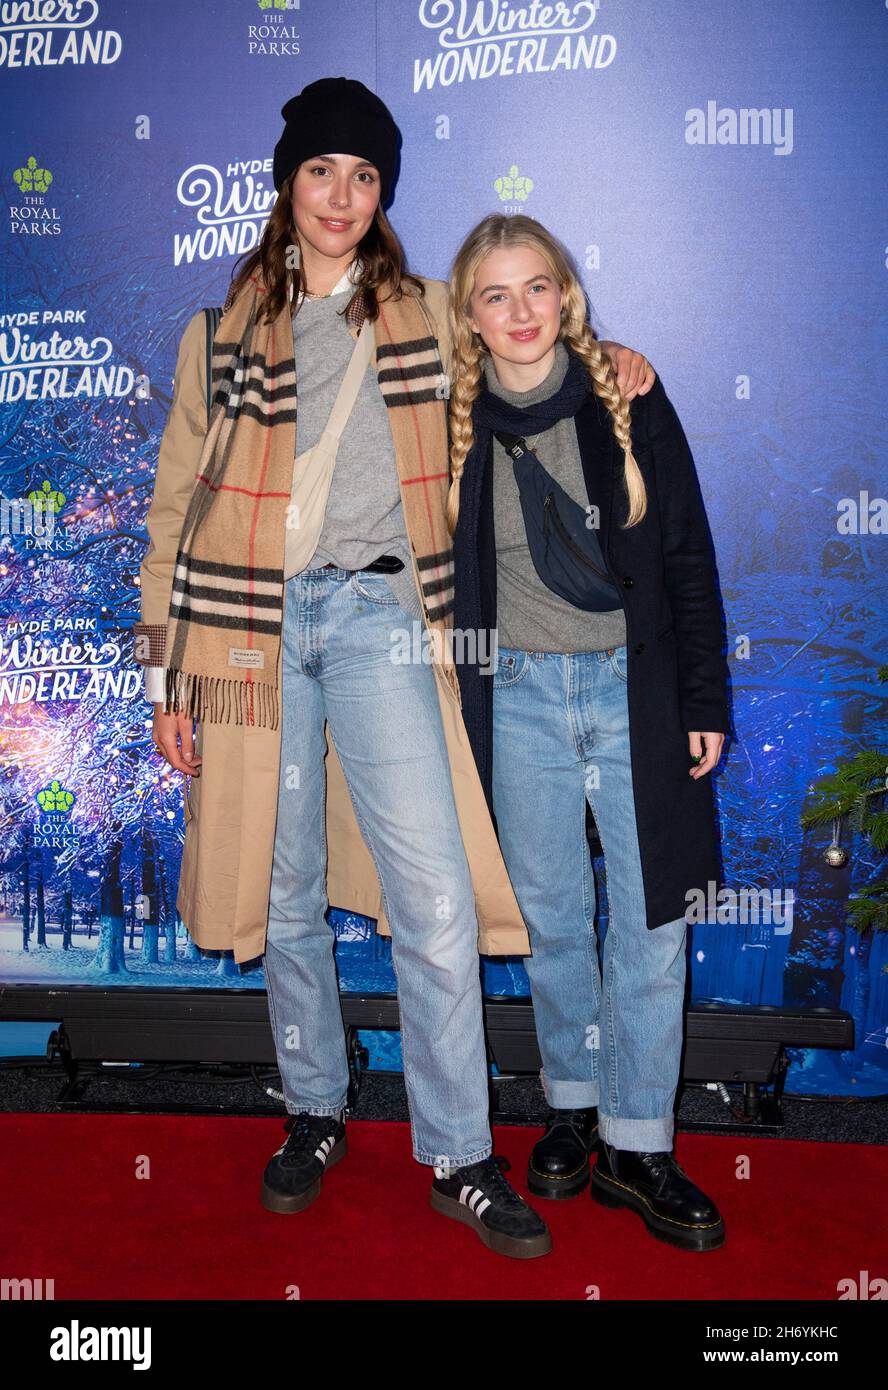 London, UK. 18th Nov, 2021. LONDON, ENGLAND - NOVEMBER 18: Anais Gallagher (R) attends the VIP Preview evening of Hyde Park Winter Wonderland at Hyde Park on 18th November 2021 in London, England. Photo Gary Mitchell/Alamy Live News Stock Photo